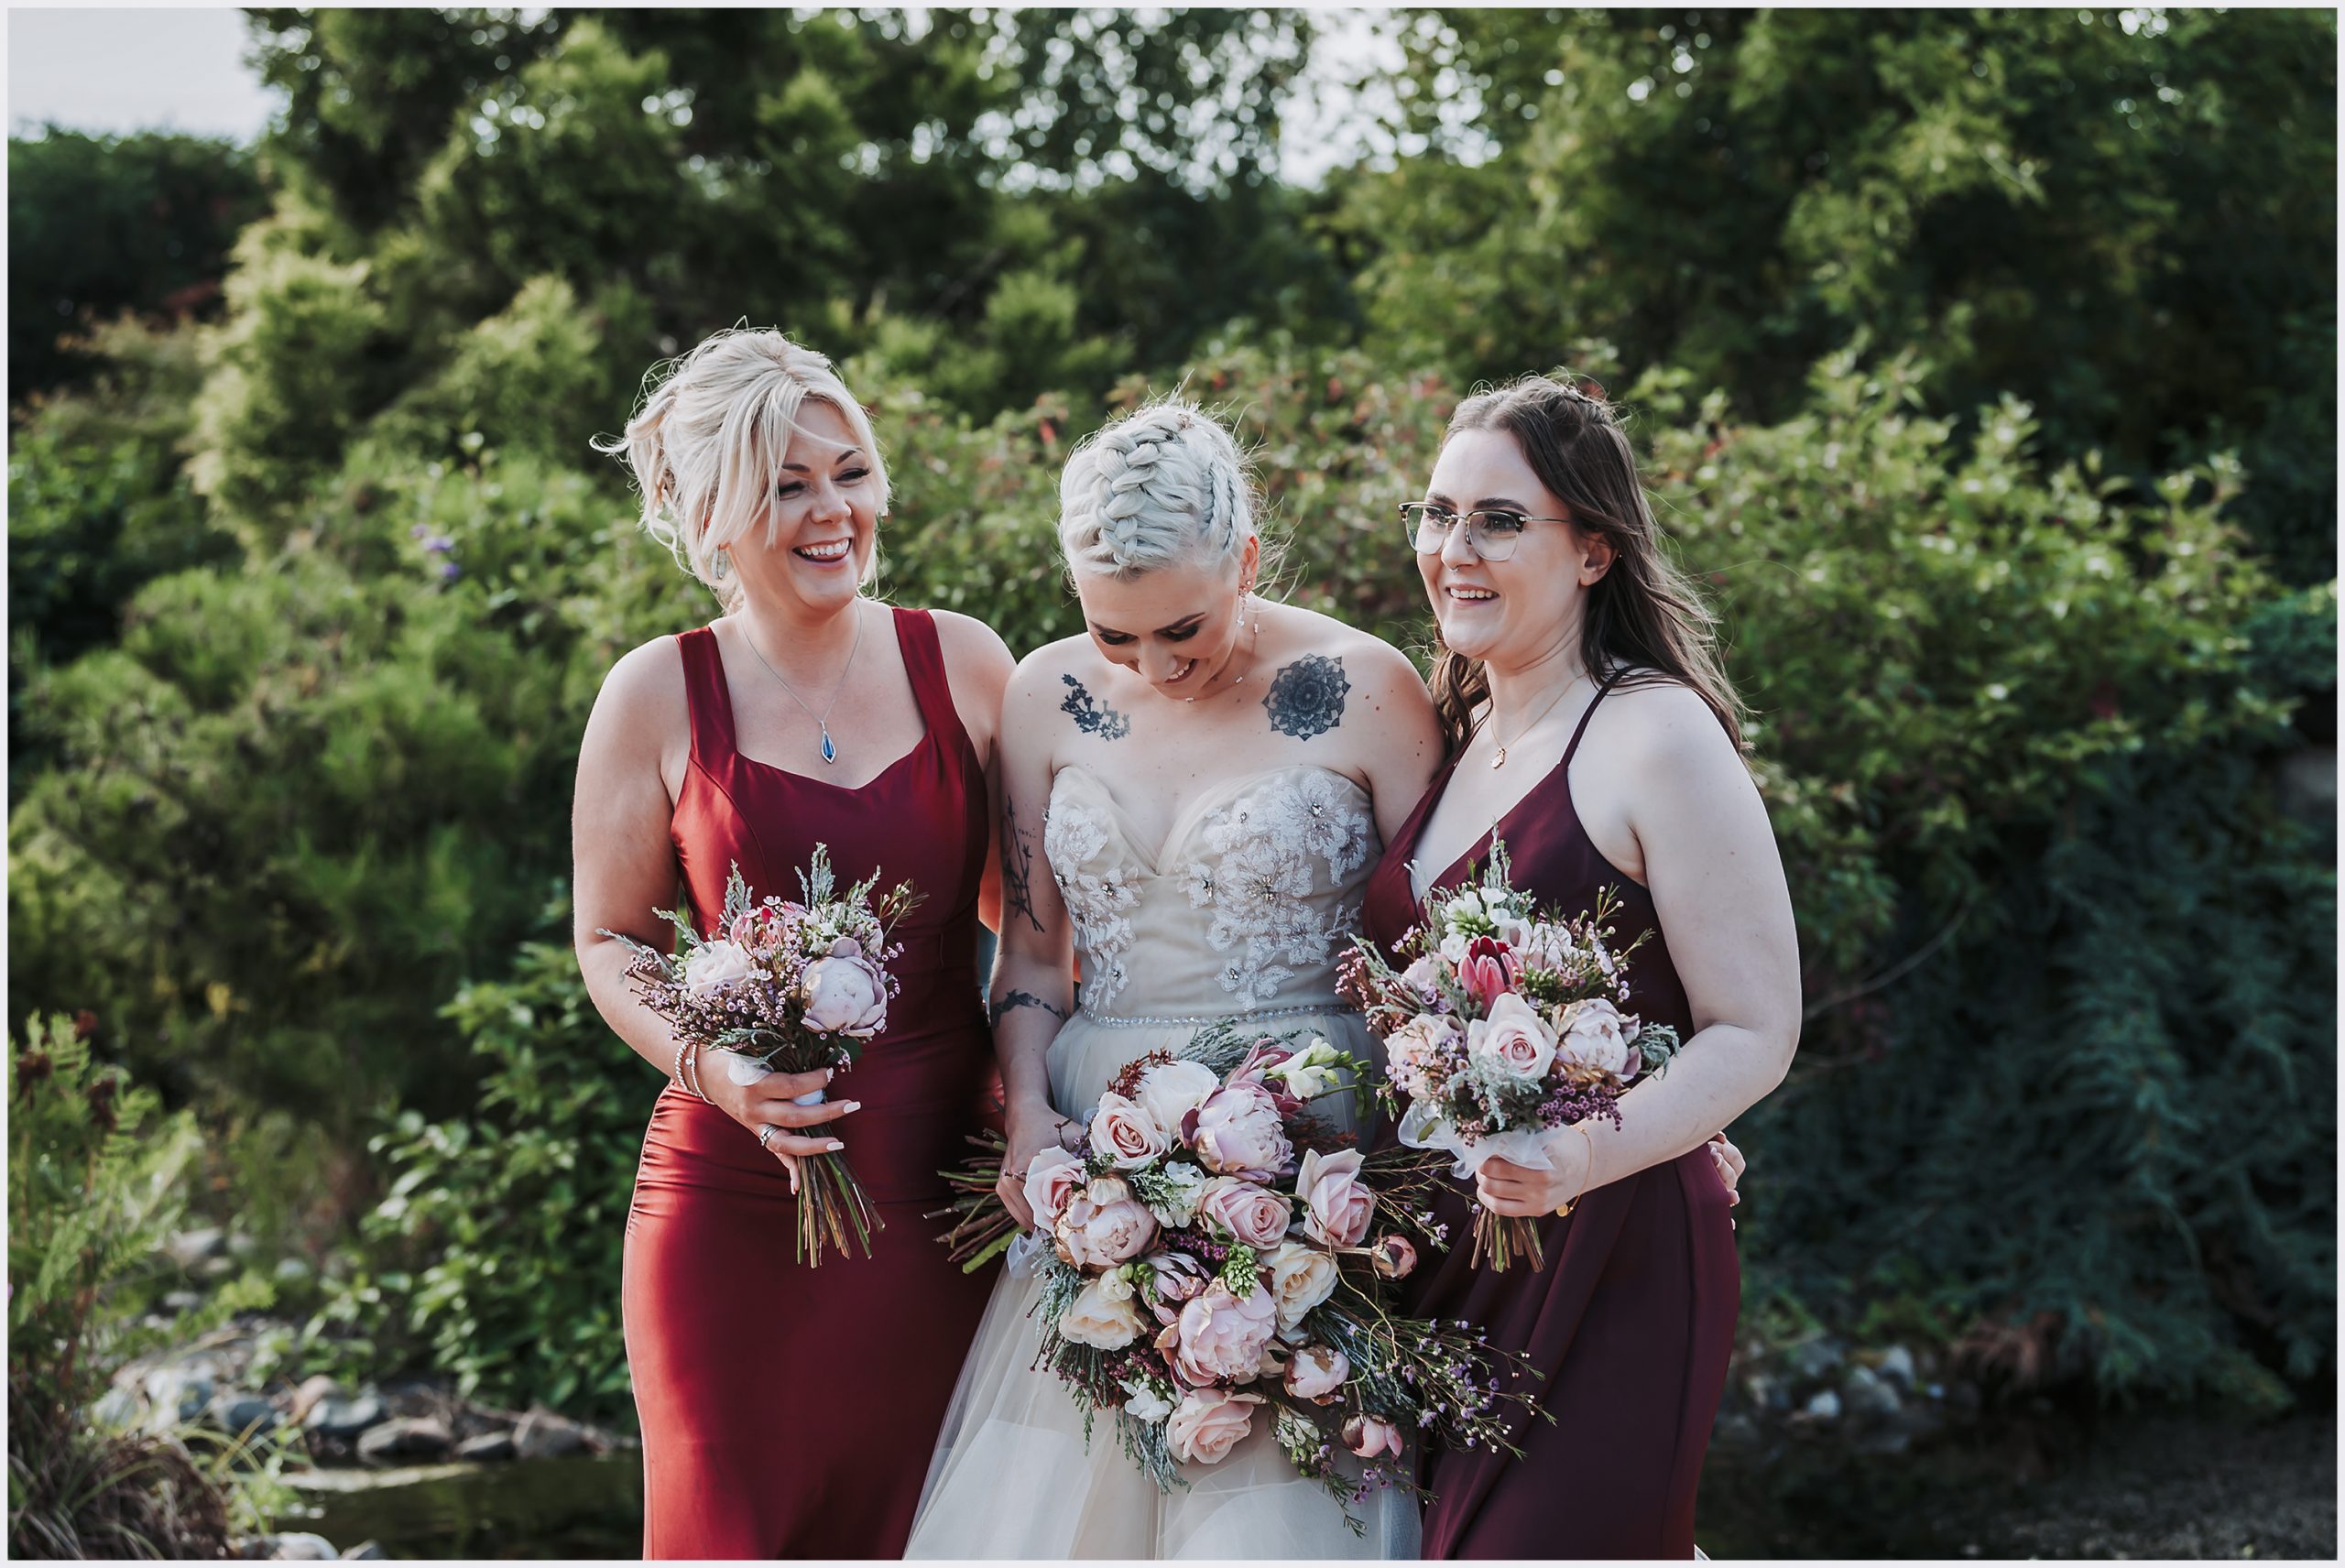 A bride and her two bridesmaids share a joke together.  The three of them are laughing and joking with each other.  They all hold a beautiful buoquet of flowers